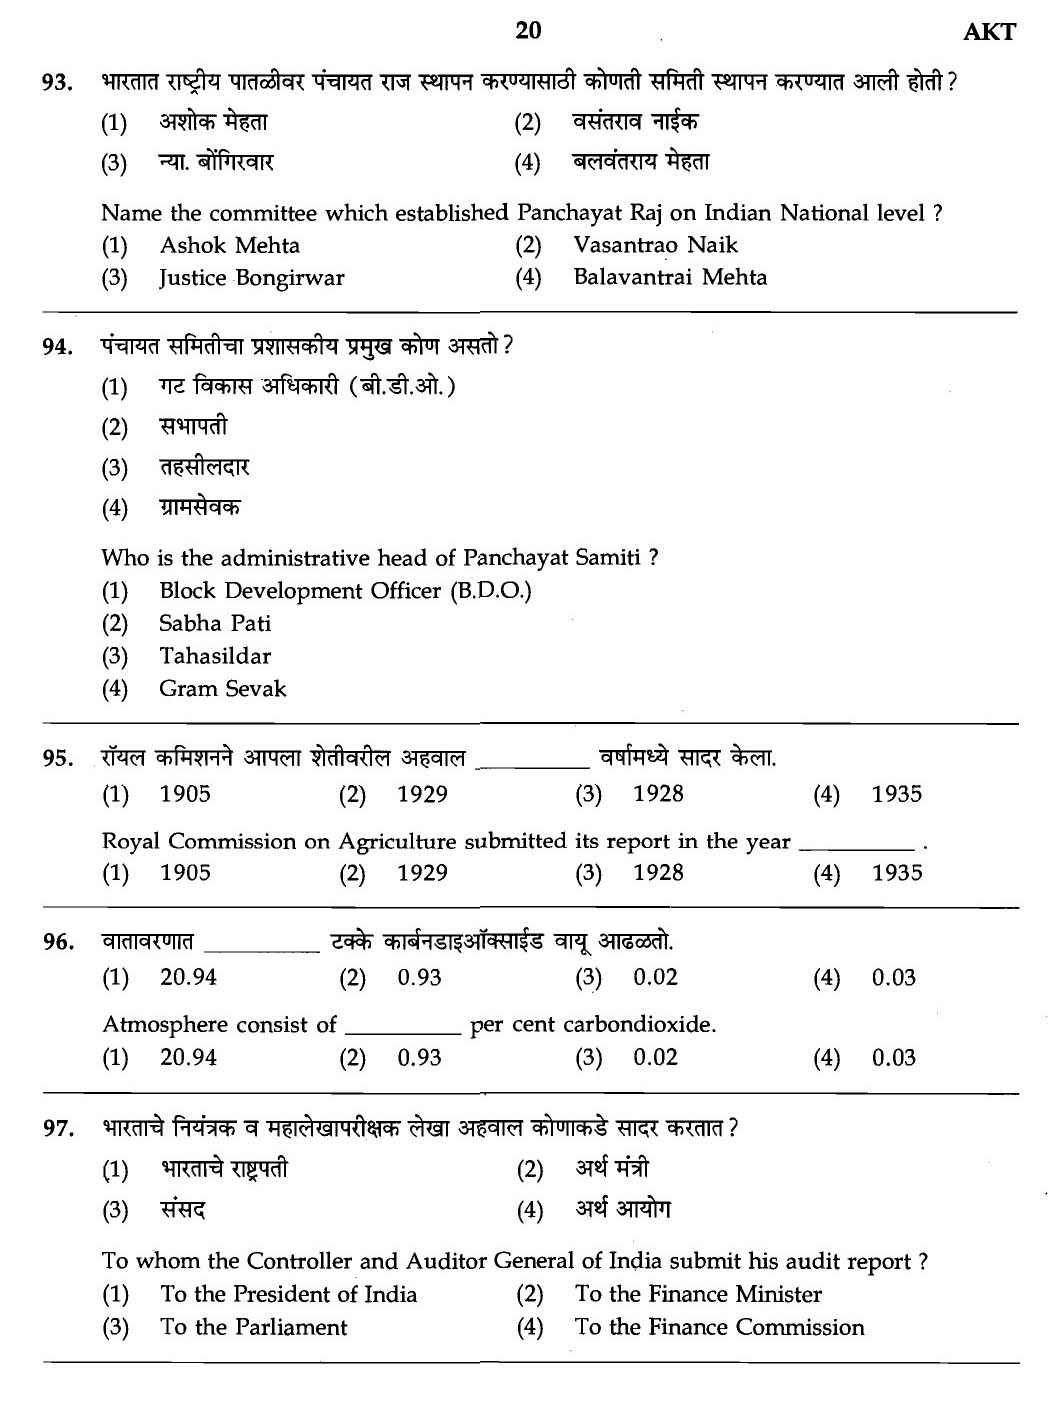 MPSC Agricultural Services Exam 2007 General Question Paper 18